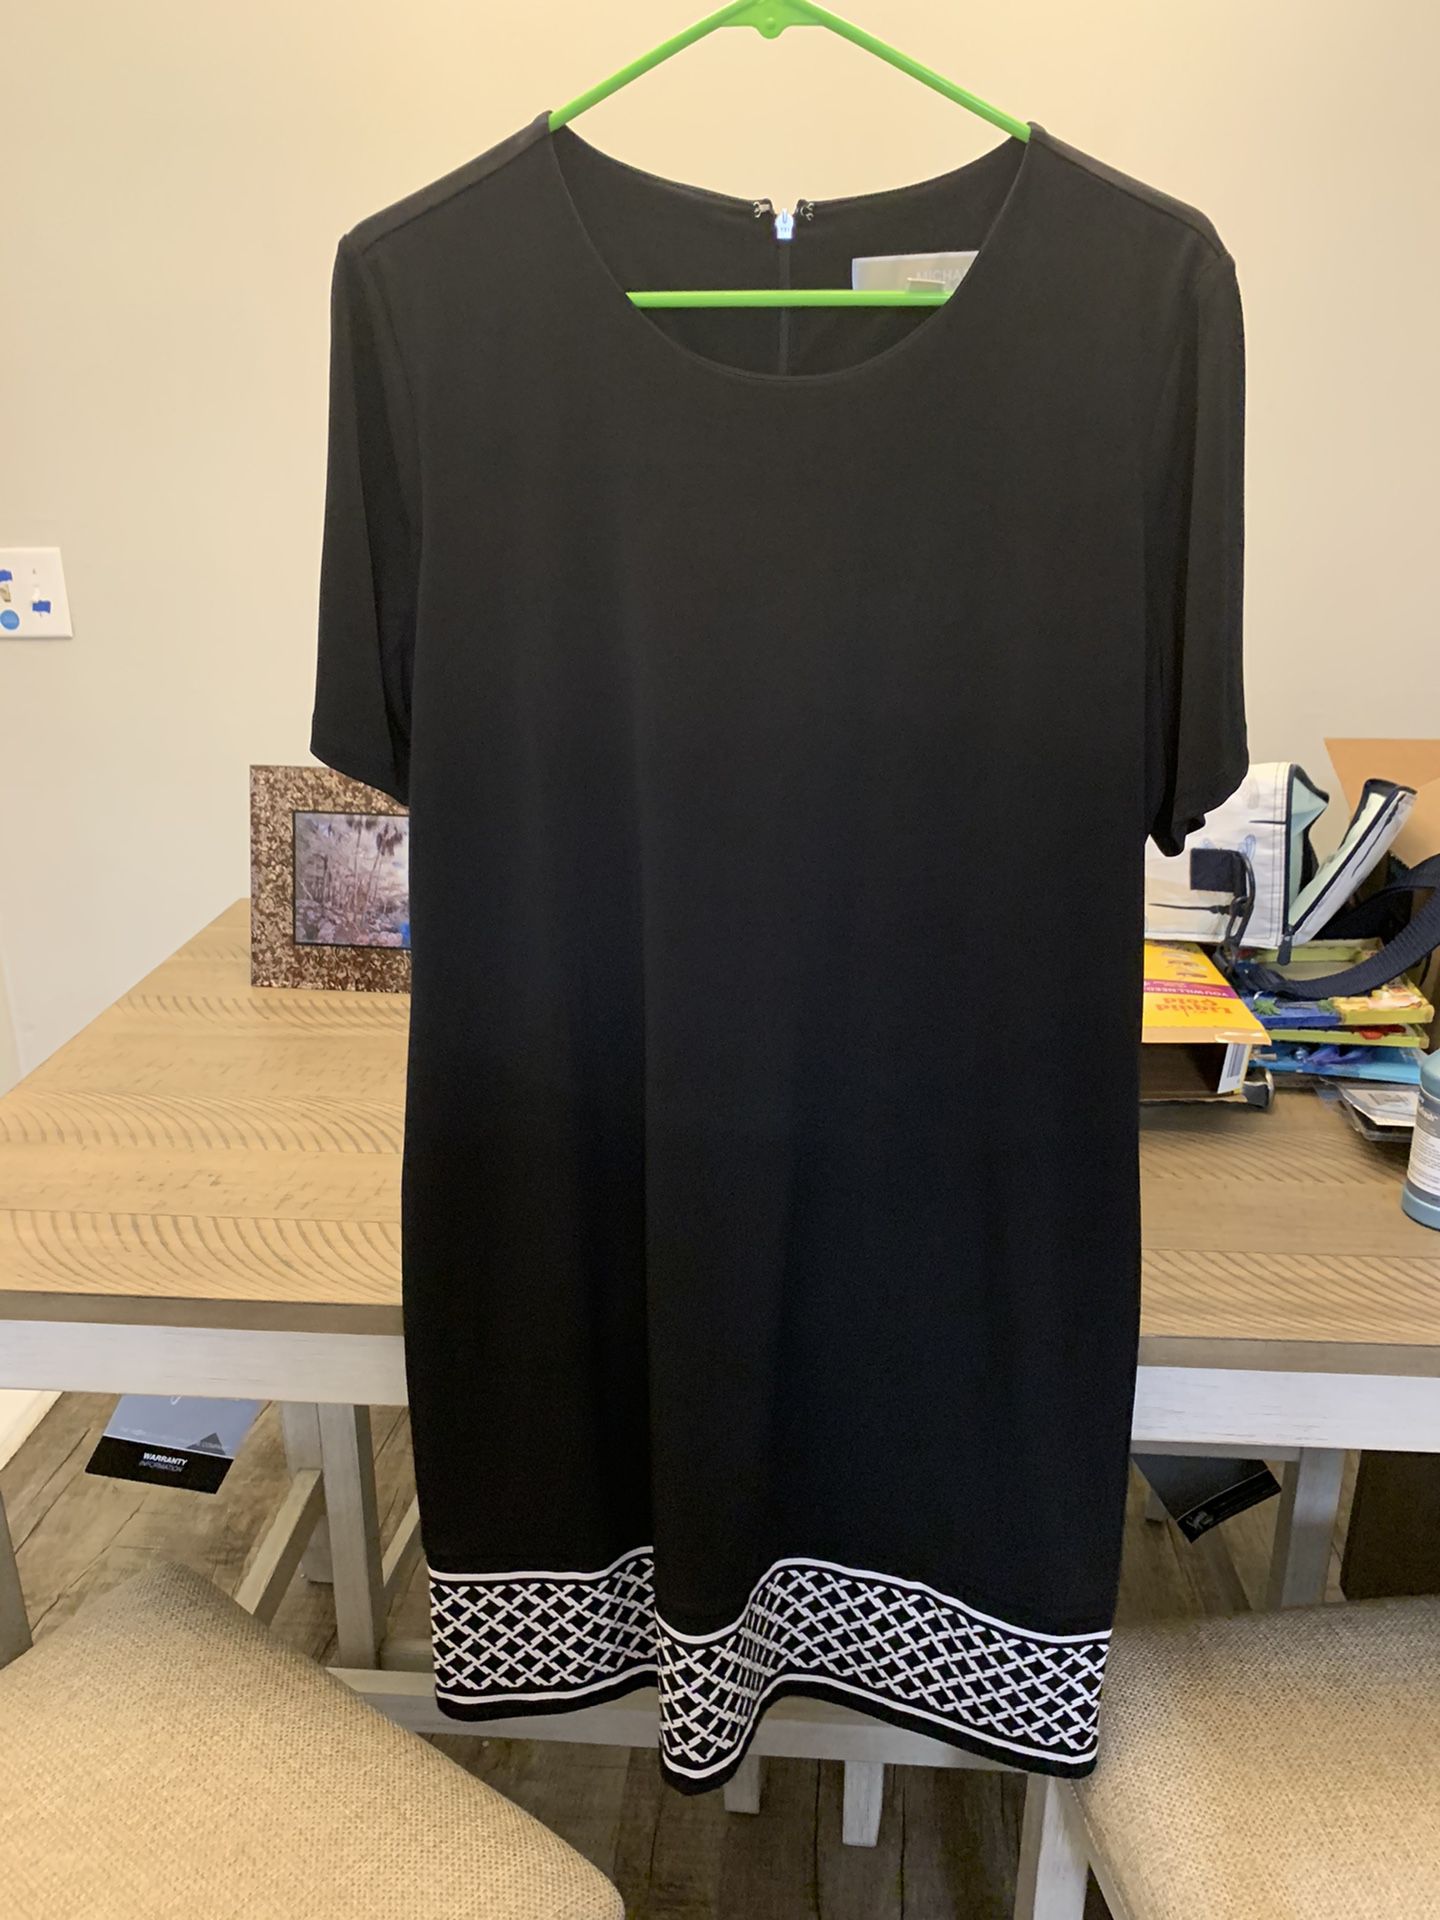 Michael Kors Dress - Willing to Ship if You Pay Shipping